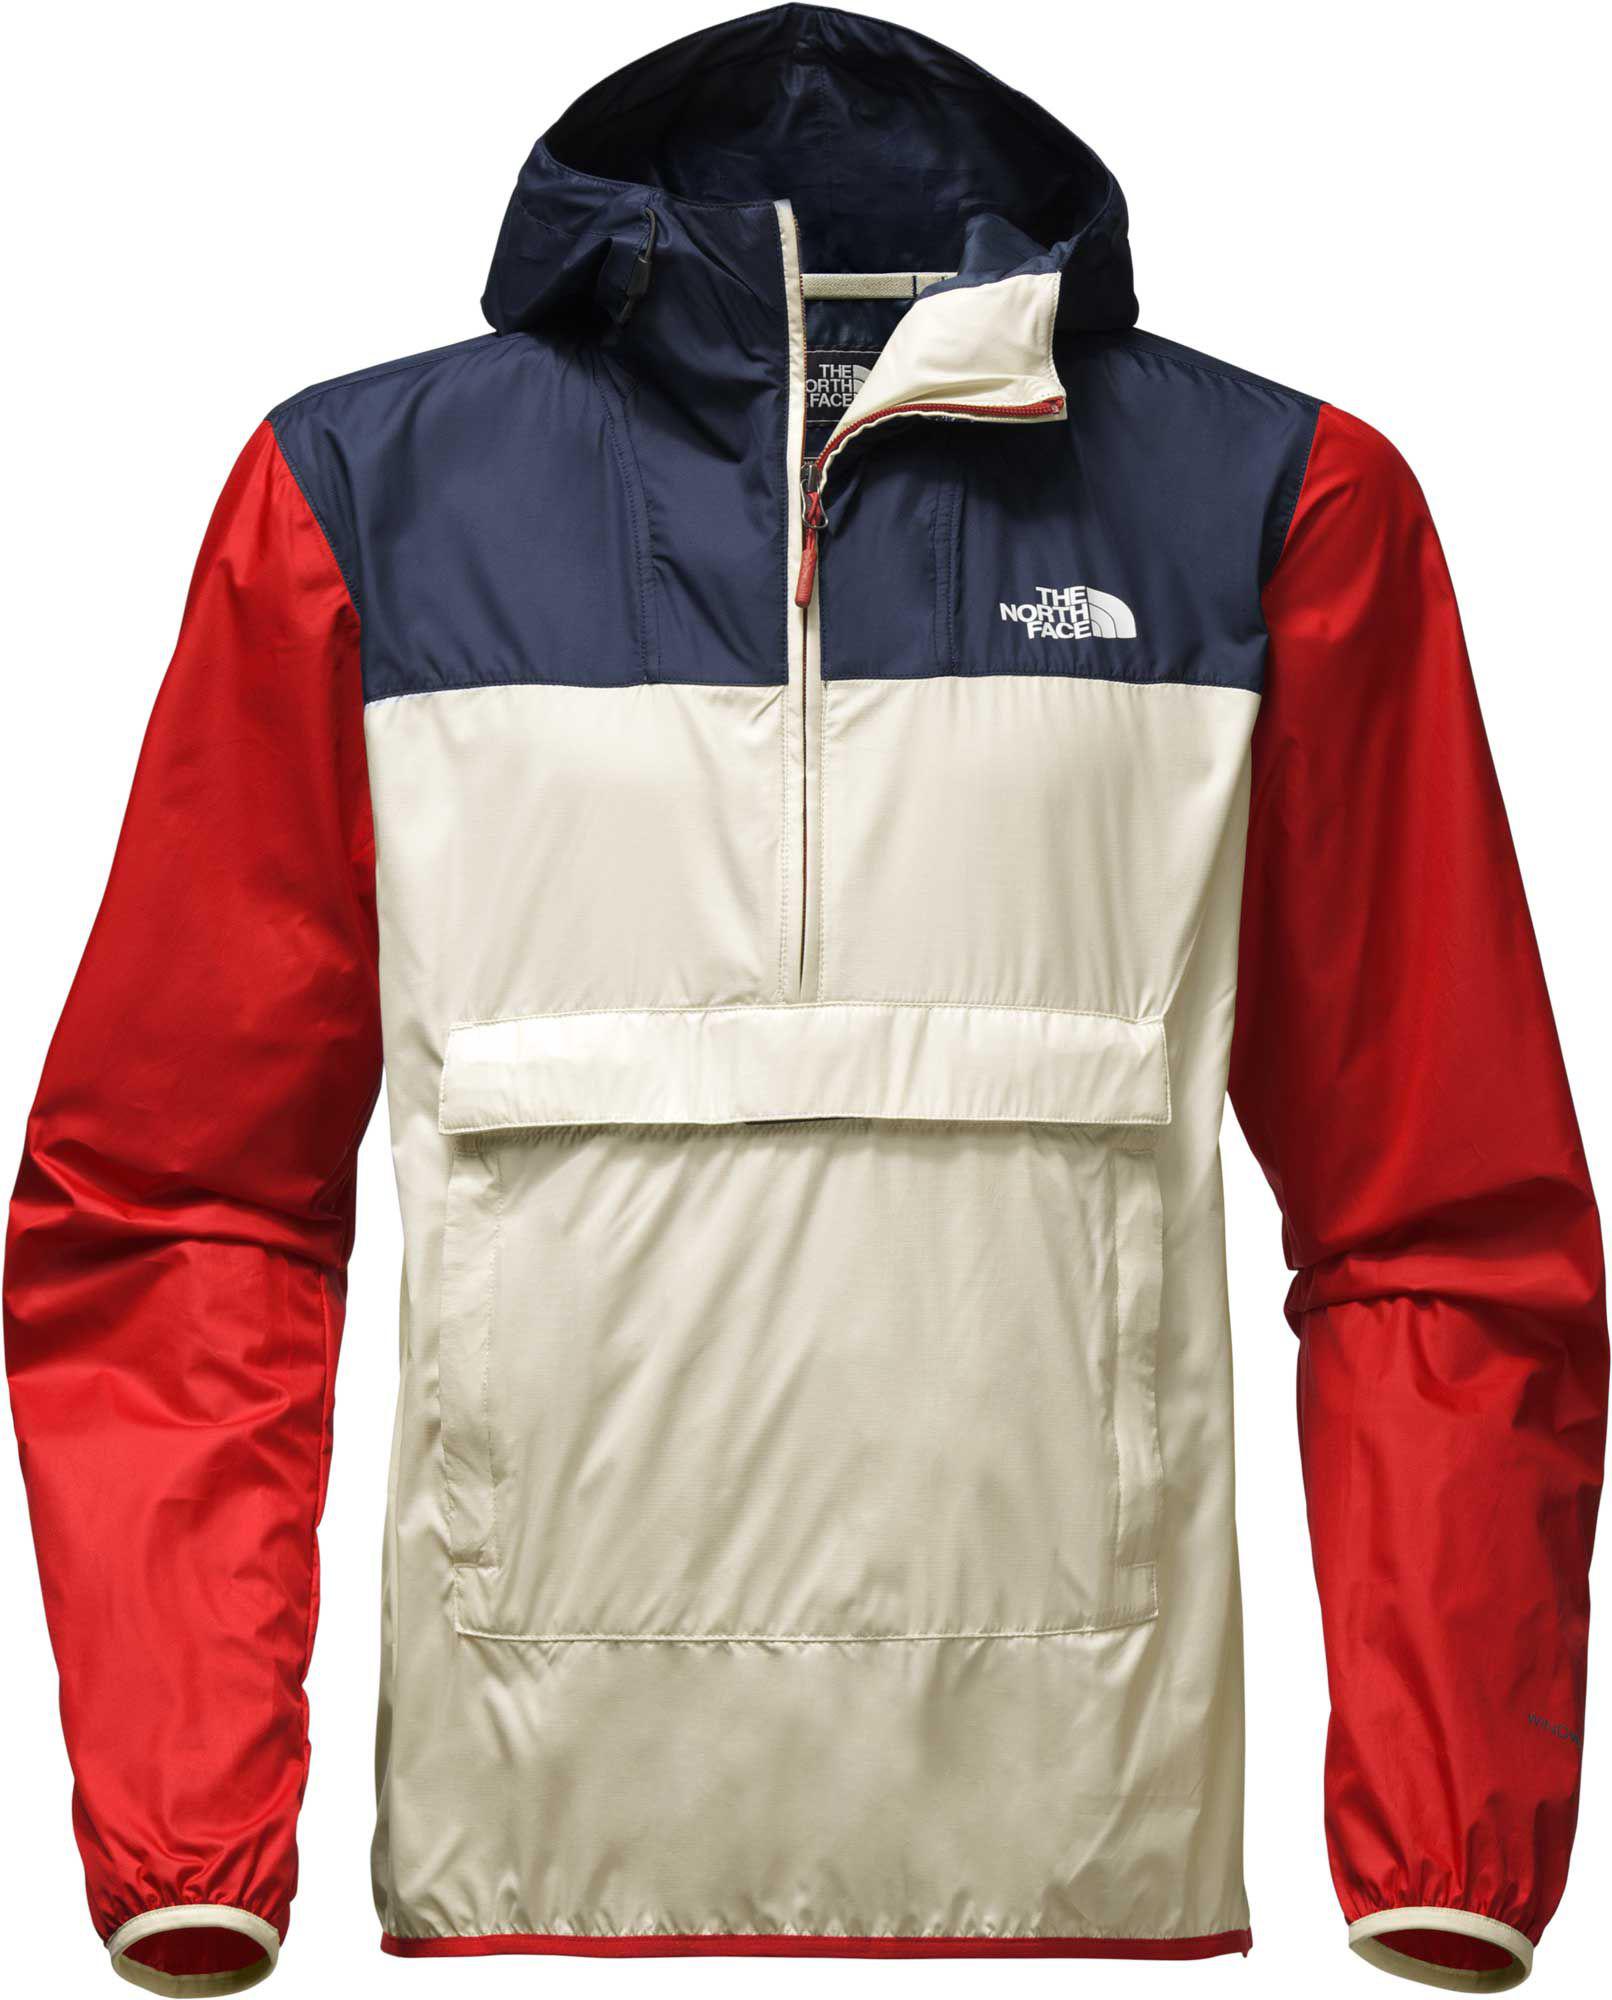 north face red white and blue jacket